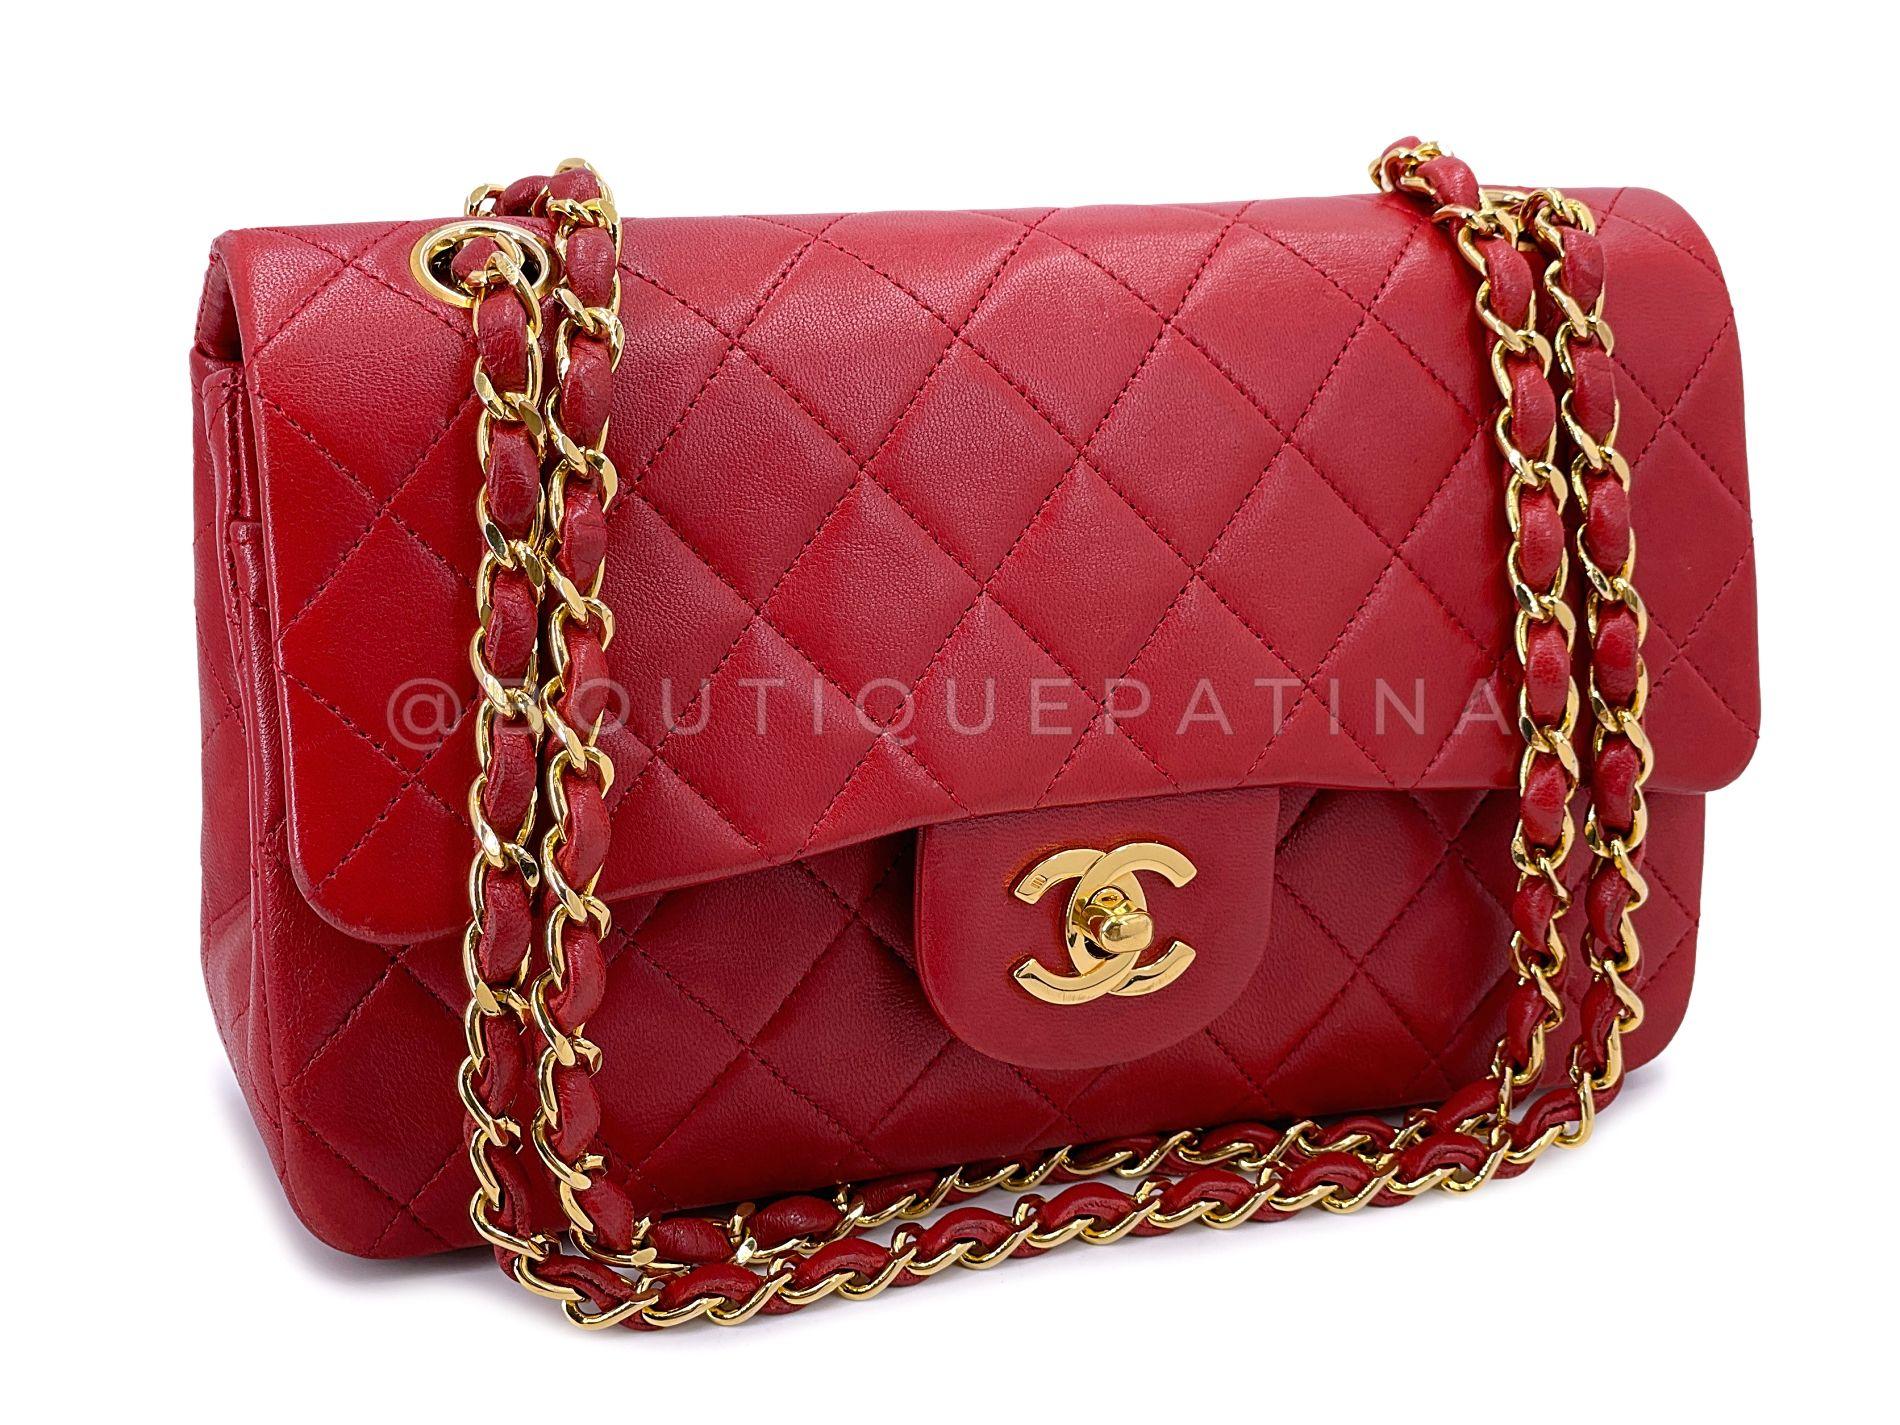 Store item: 68032
This Chanel 1988 Vintage Red Small Classic Double Flap Bag 24k GHW Lambskin is a very rare find as it's nearly impossible to find untouched red lambskin that's never been refurbished or redyed, and still in excellent condition.